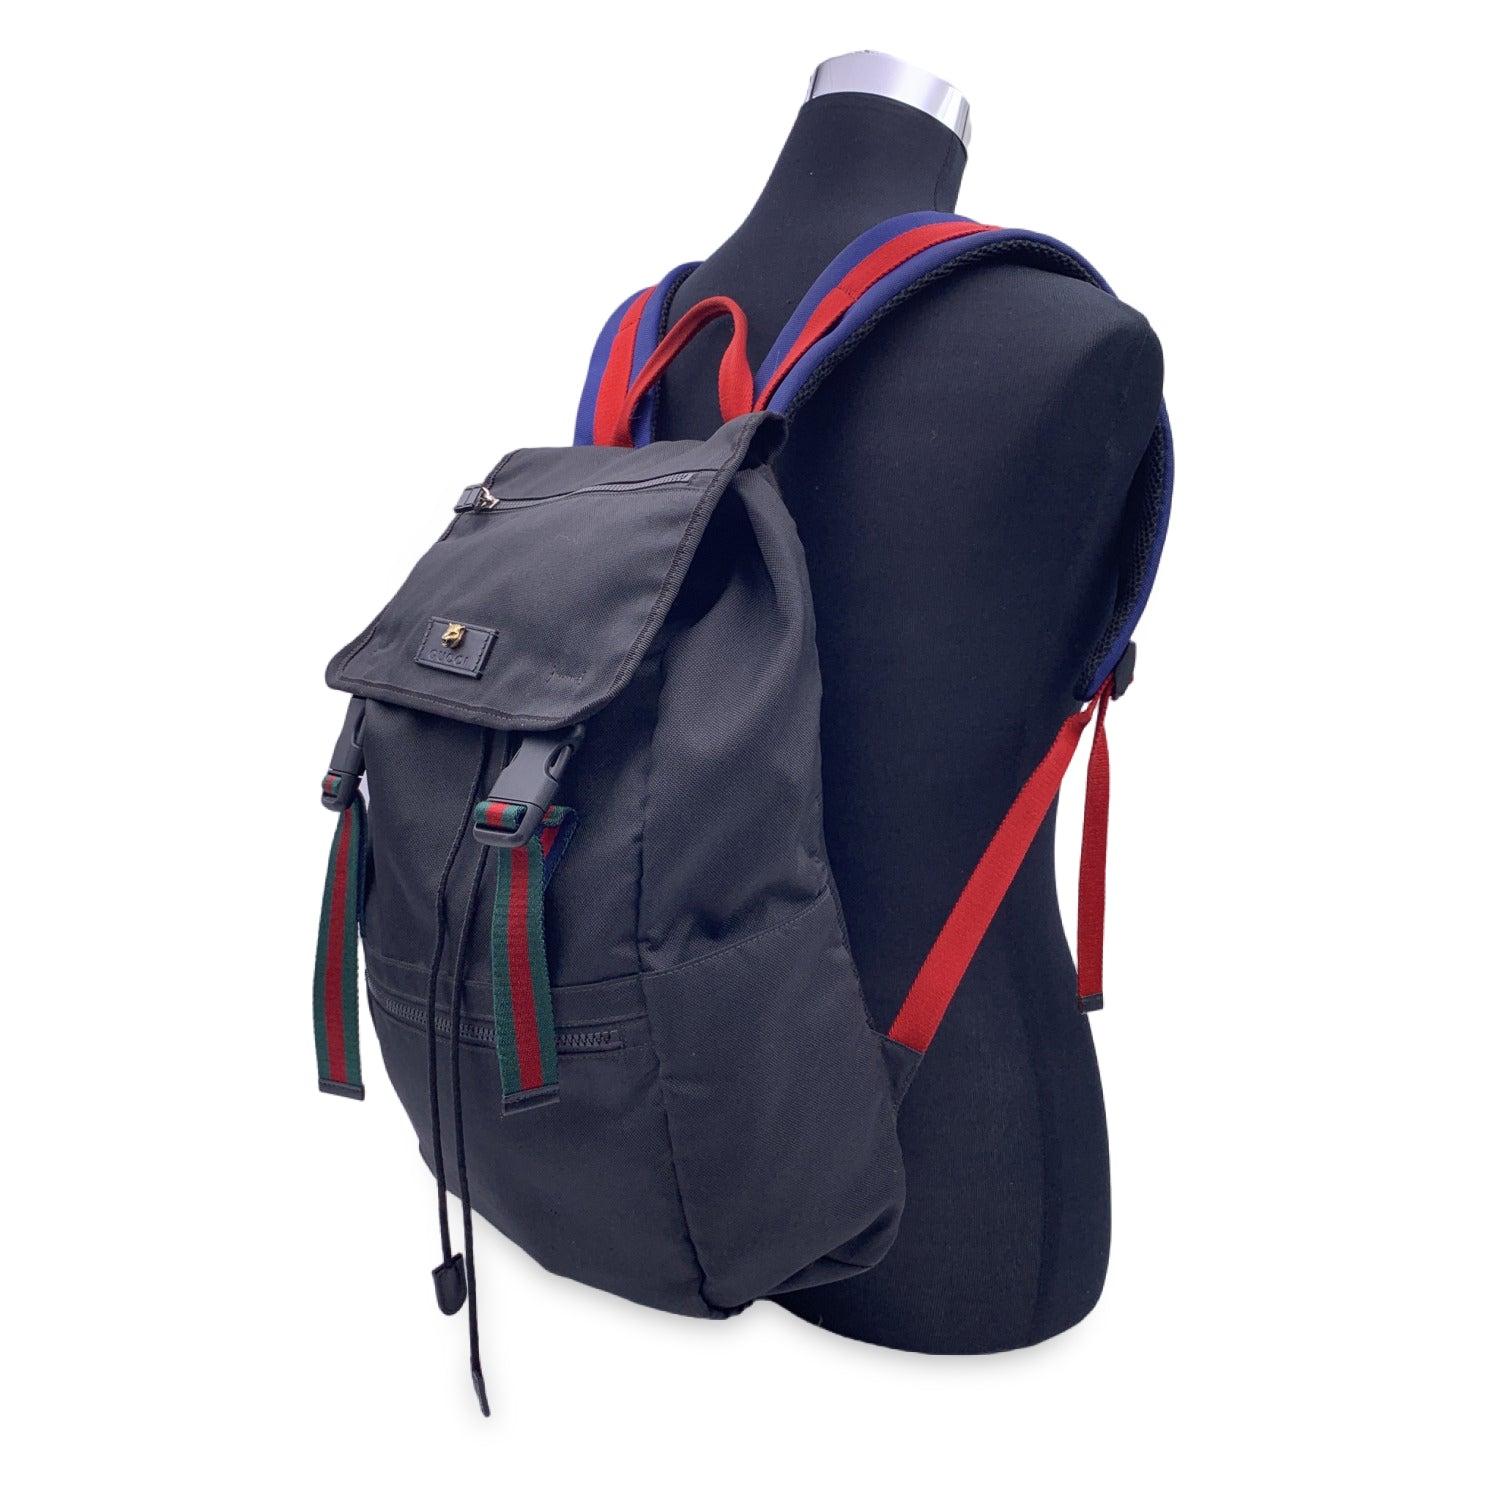 This beautiful Bag will come with a Certificate of Authenticity provided by Entrupy. The certificate will be provided at no further cost. Unisex Backpack by Gucci from the Sherry Line collection, crafted in durable black techno canvas. It features